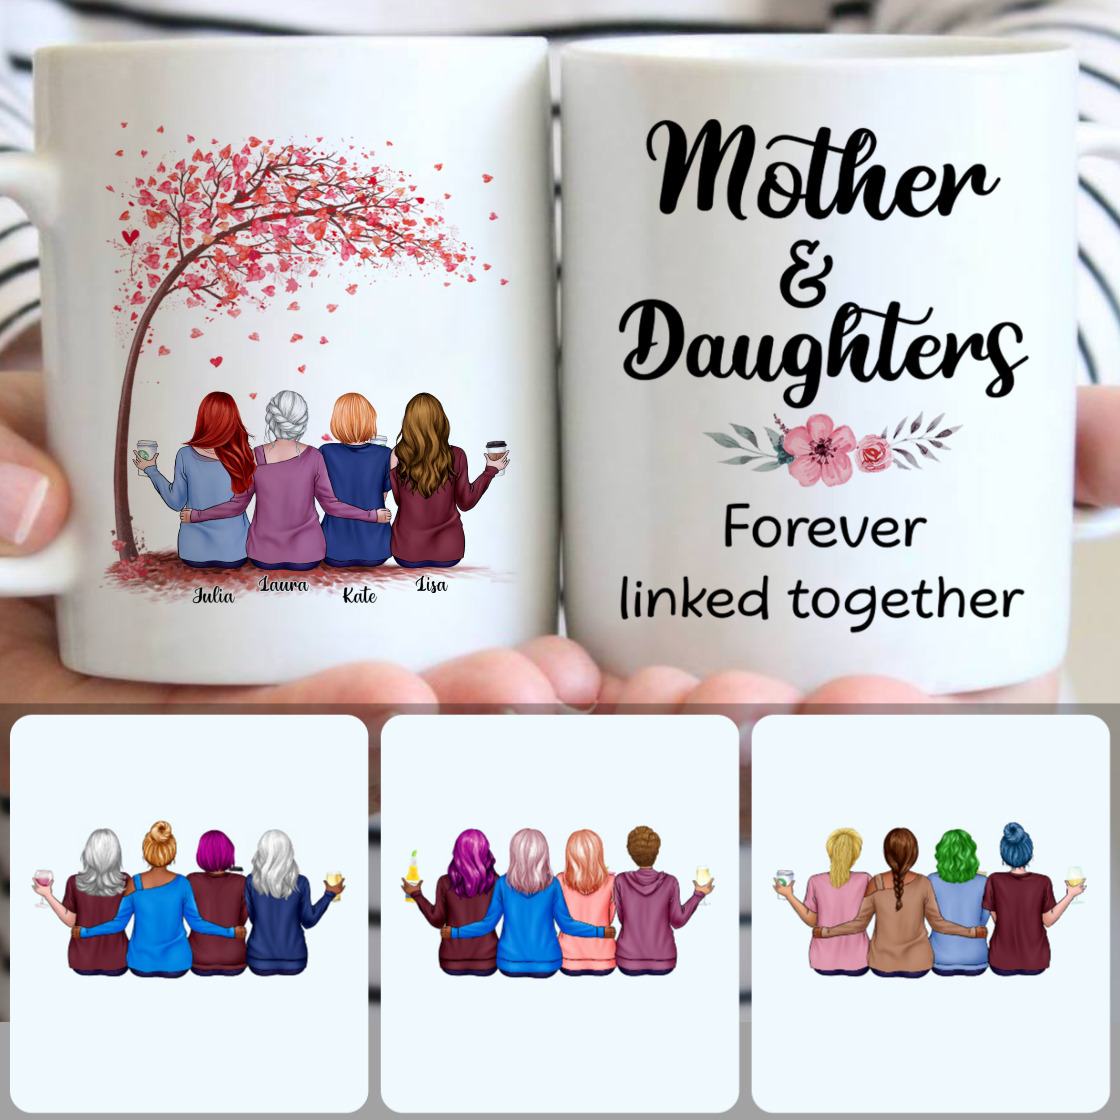 Personalized Mug, Unique Gifts For Mom, Mother & 3 Daughters Customized Coffee Mug With Names